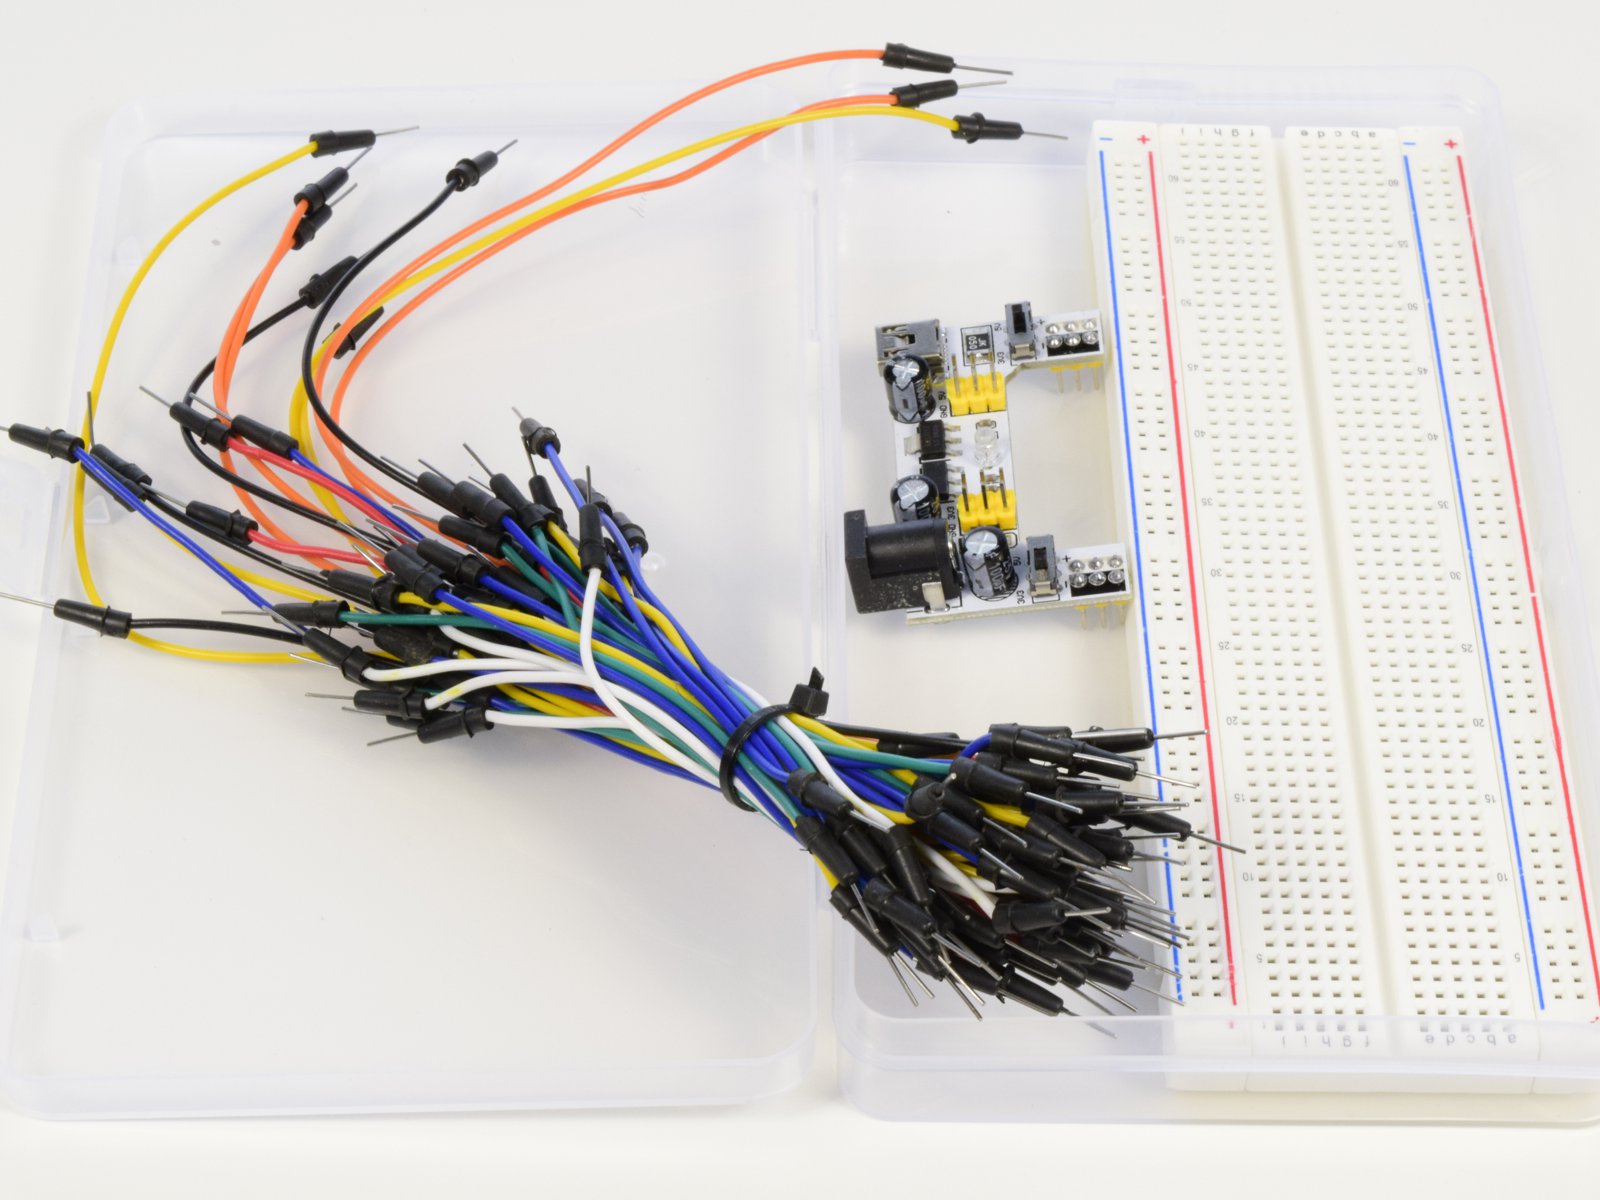 Breadboard 830 Starter Kit with wires and power supply 4